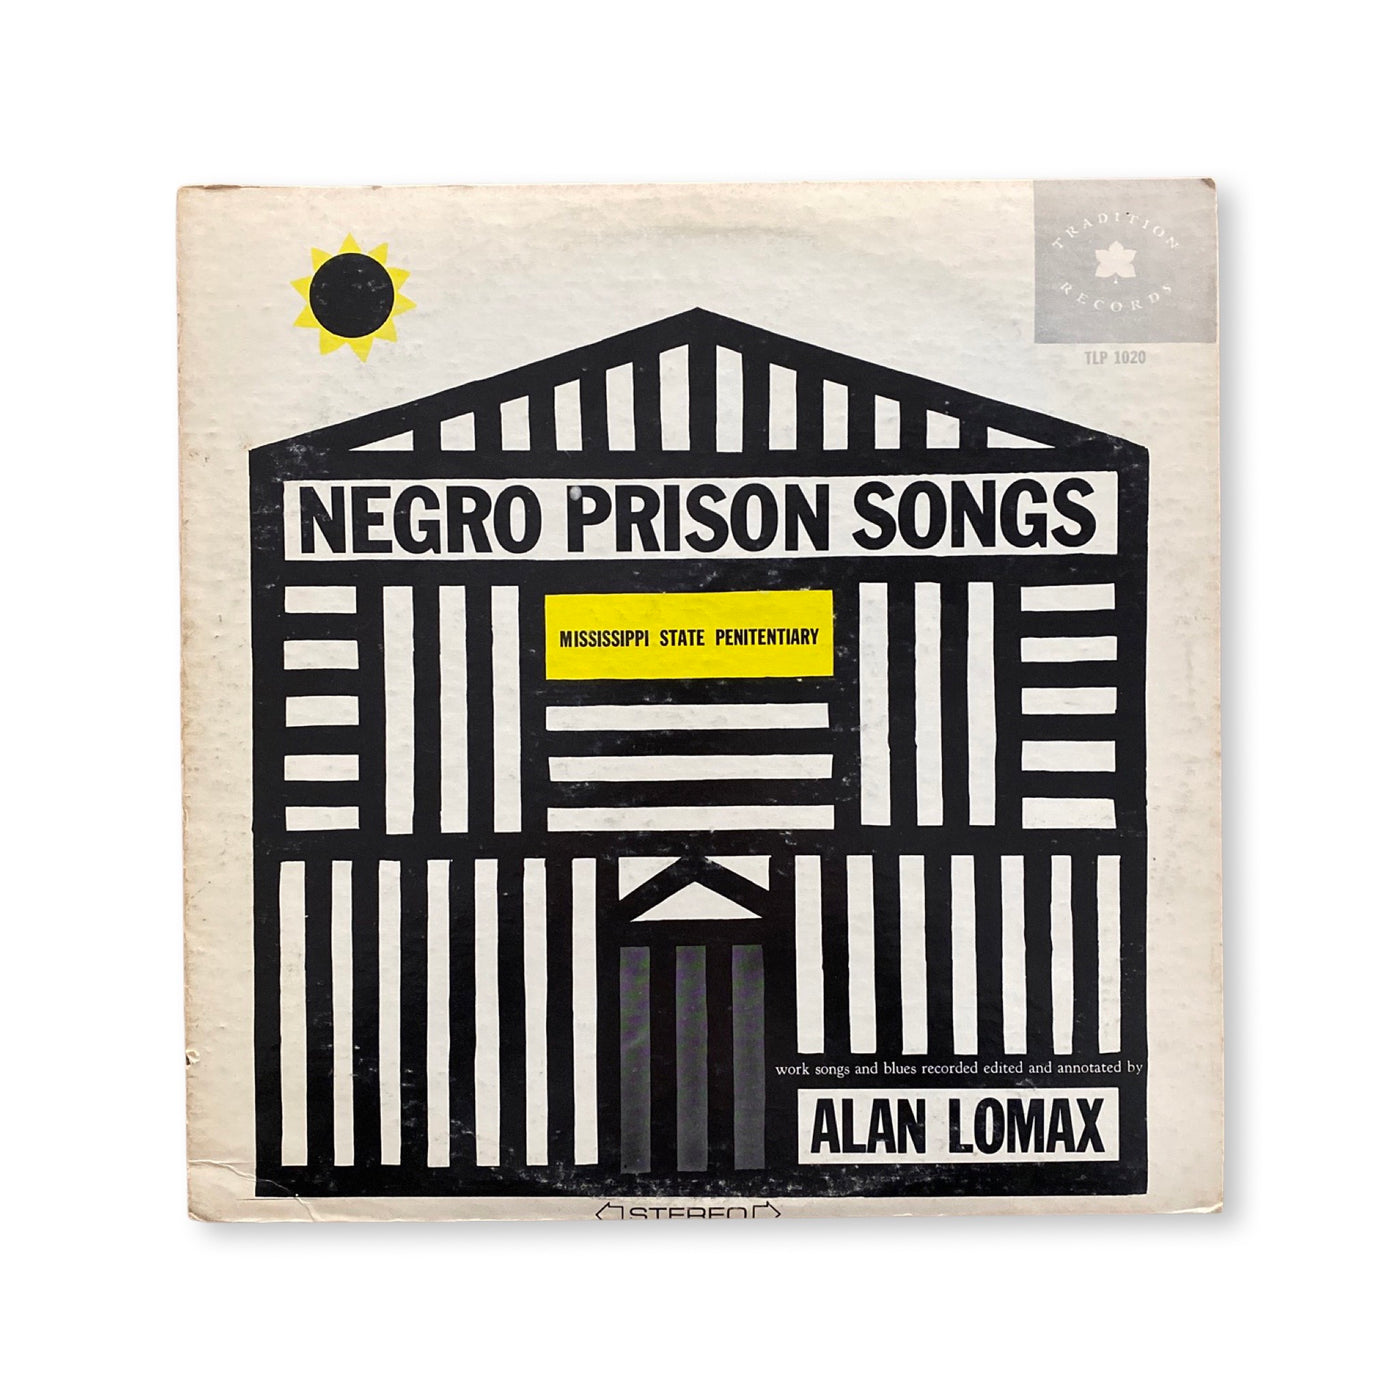 Alan Lomax - Negro Prison Songs From The Mississippi State Penitentiary